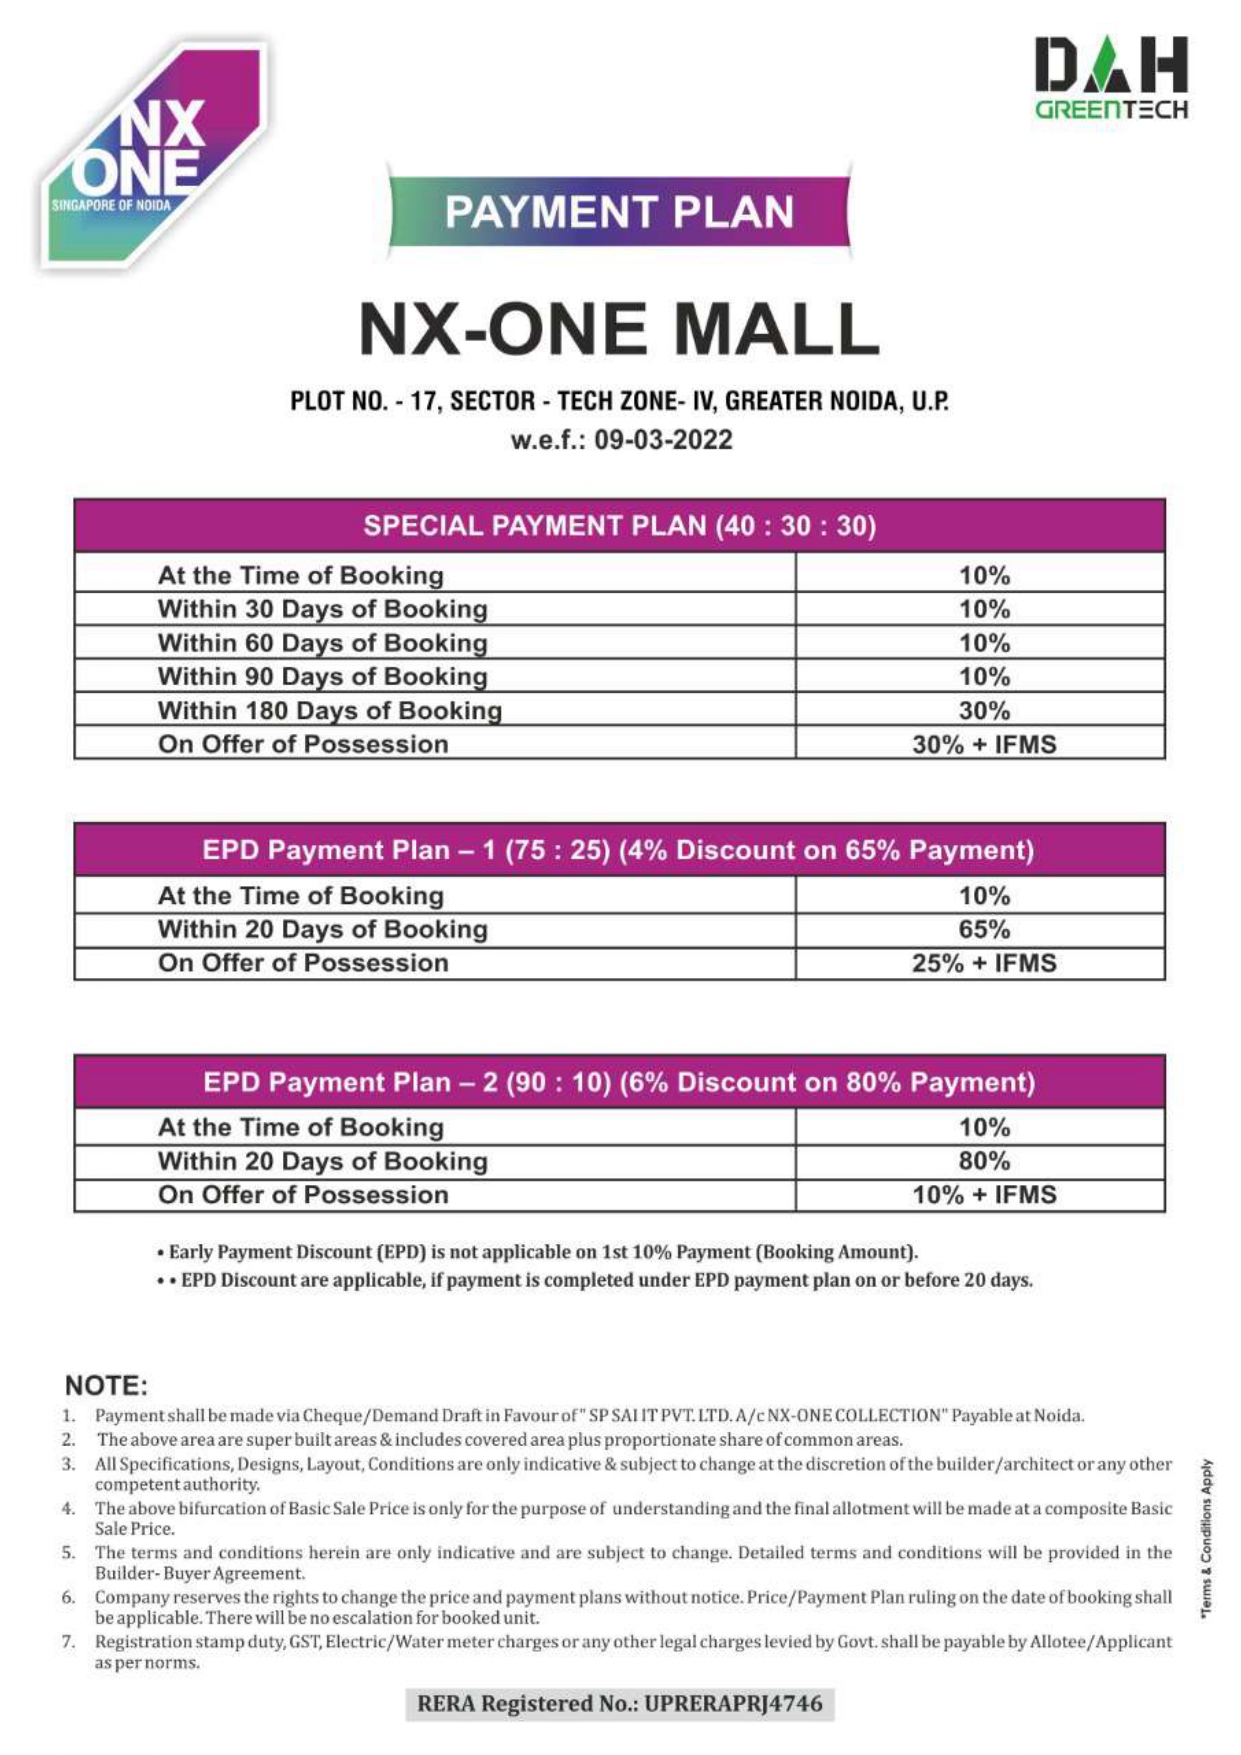 NX One Mall payment plan